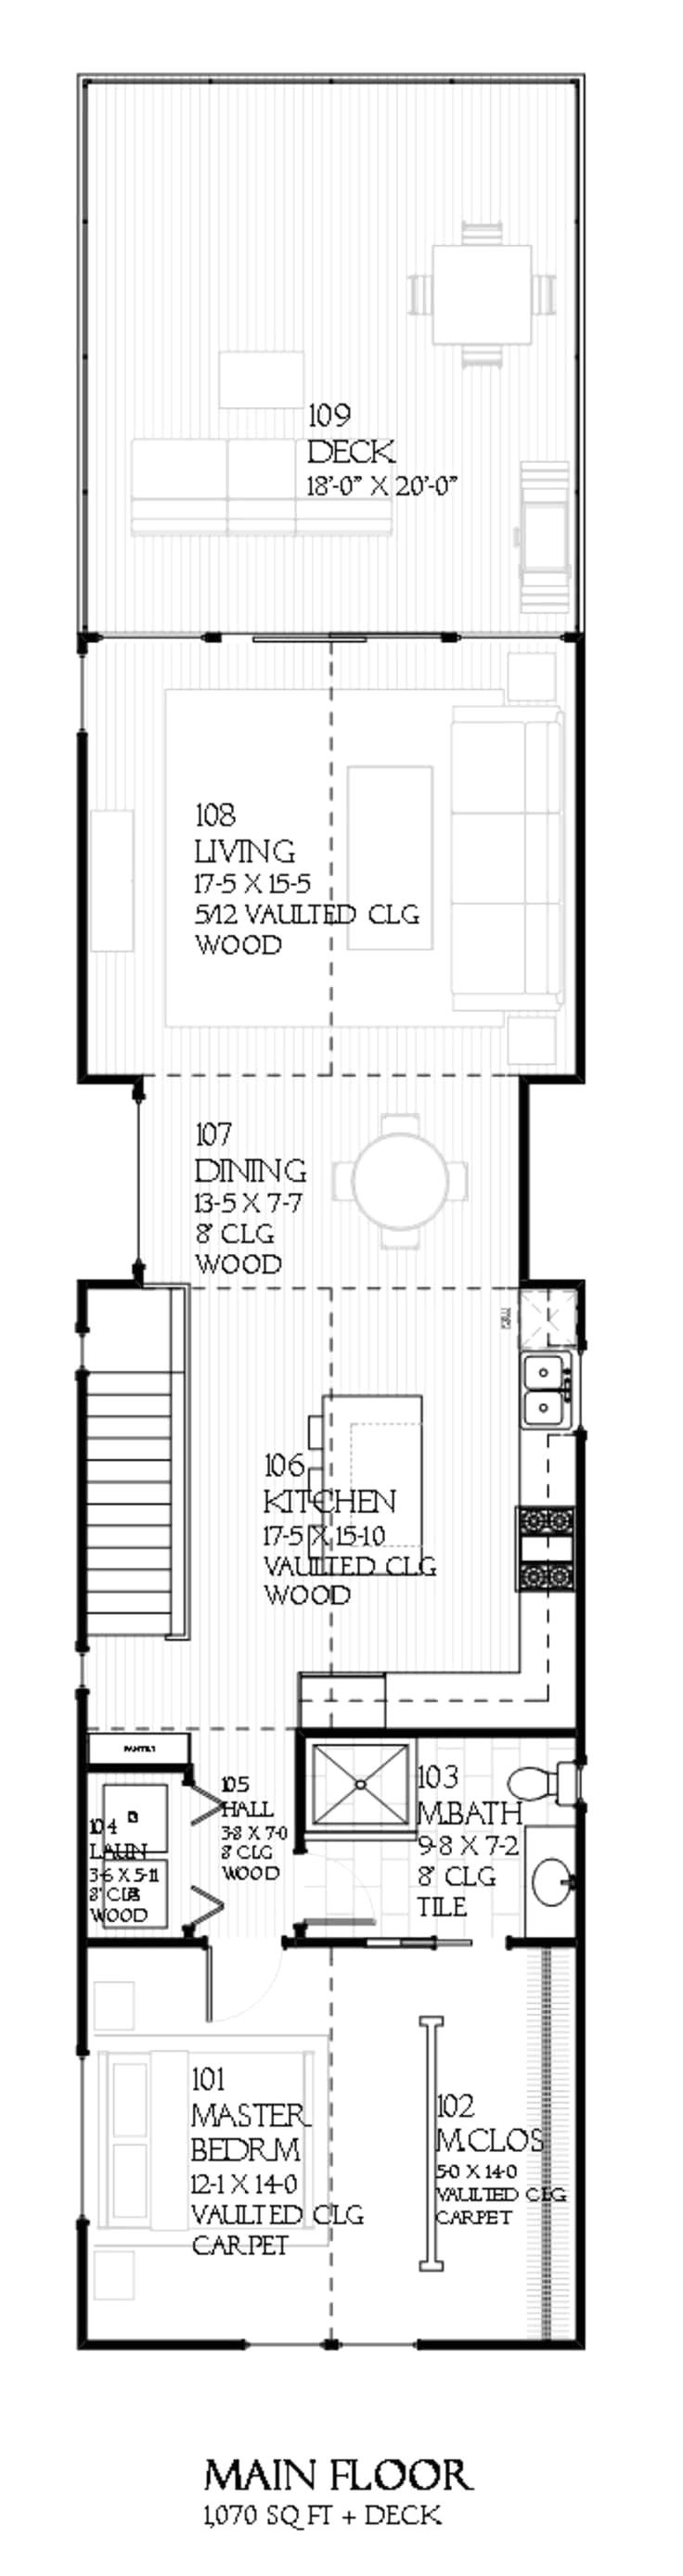 luxury small house plans beautiful small cottage floor plans luxury small cottage floor plans best 430